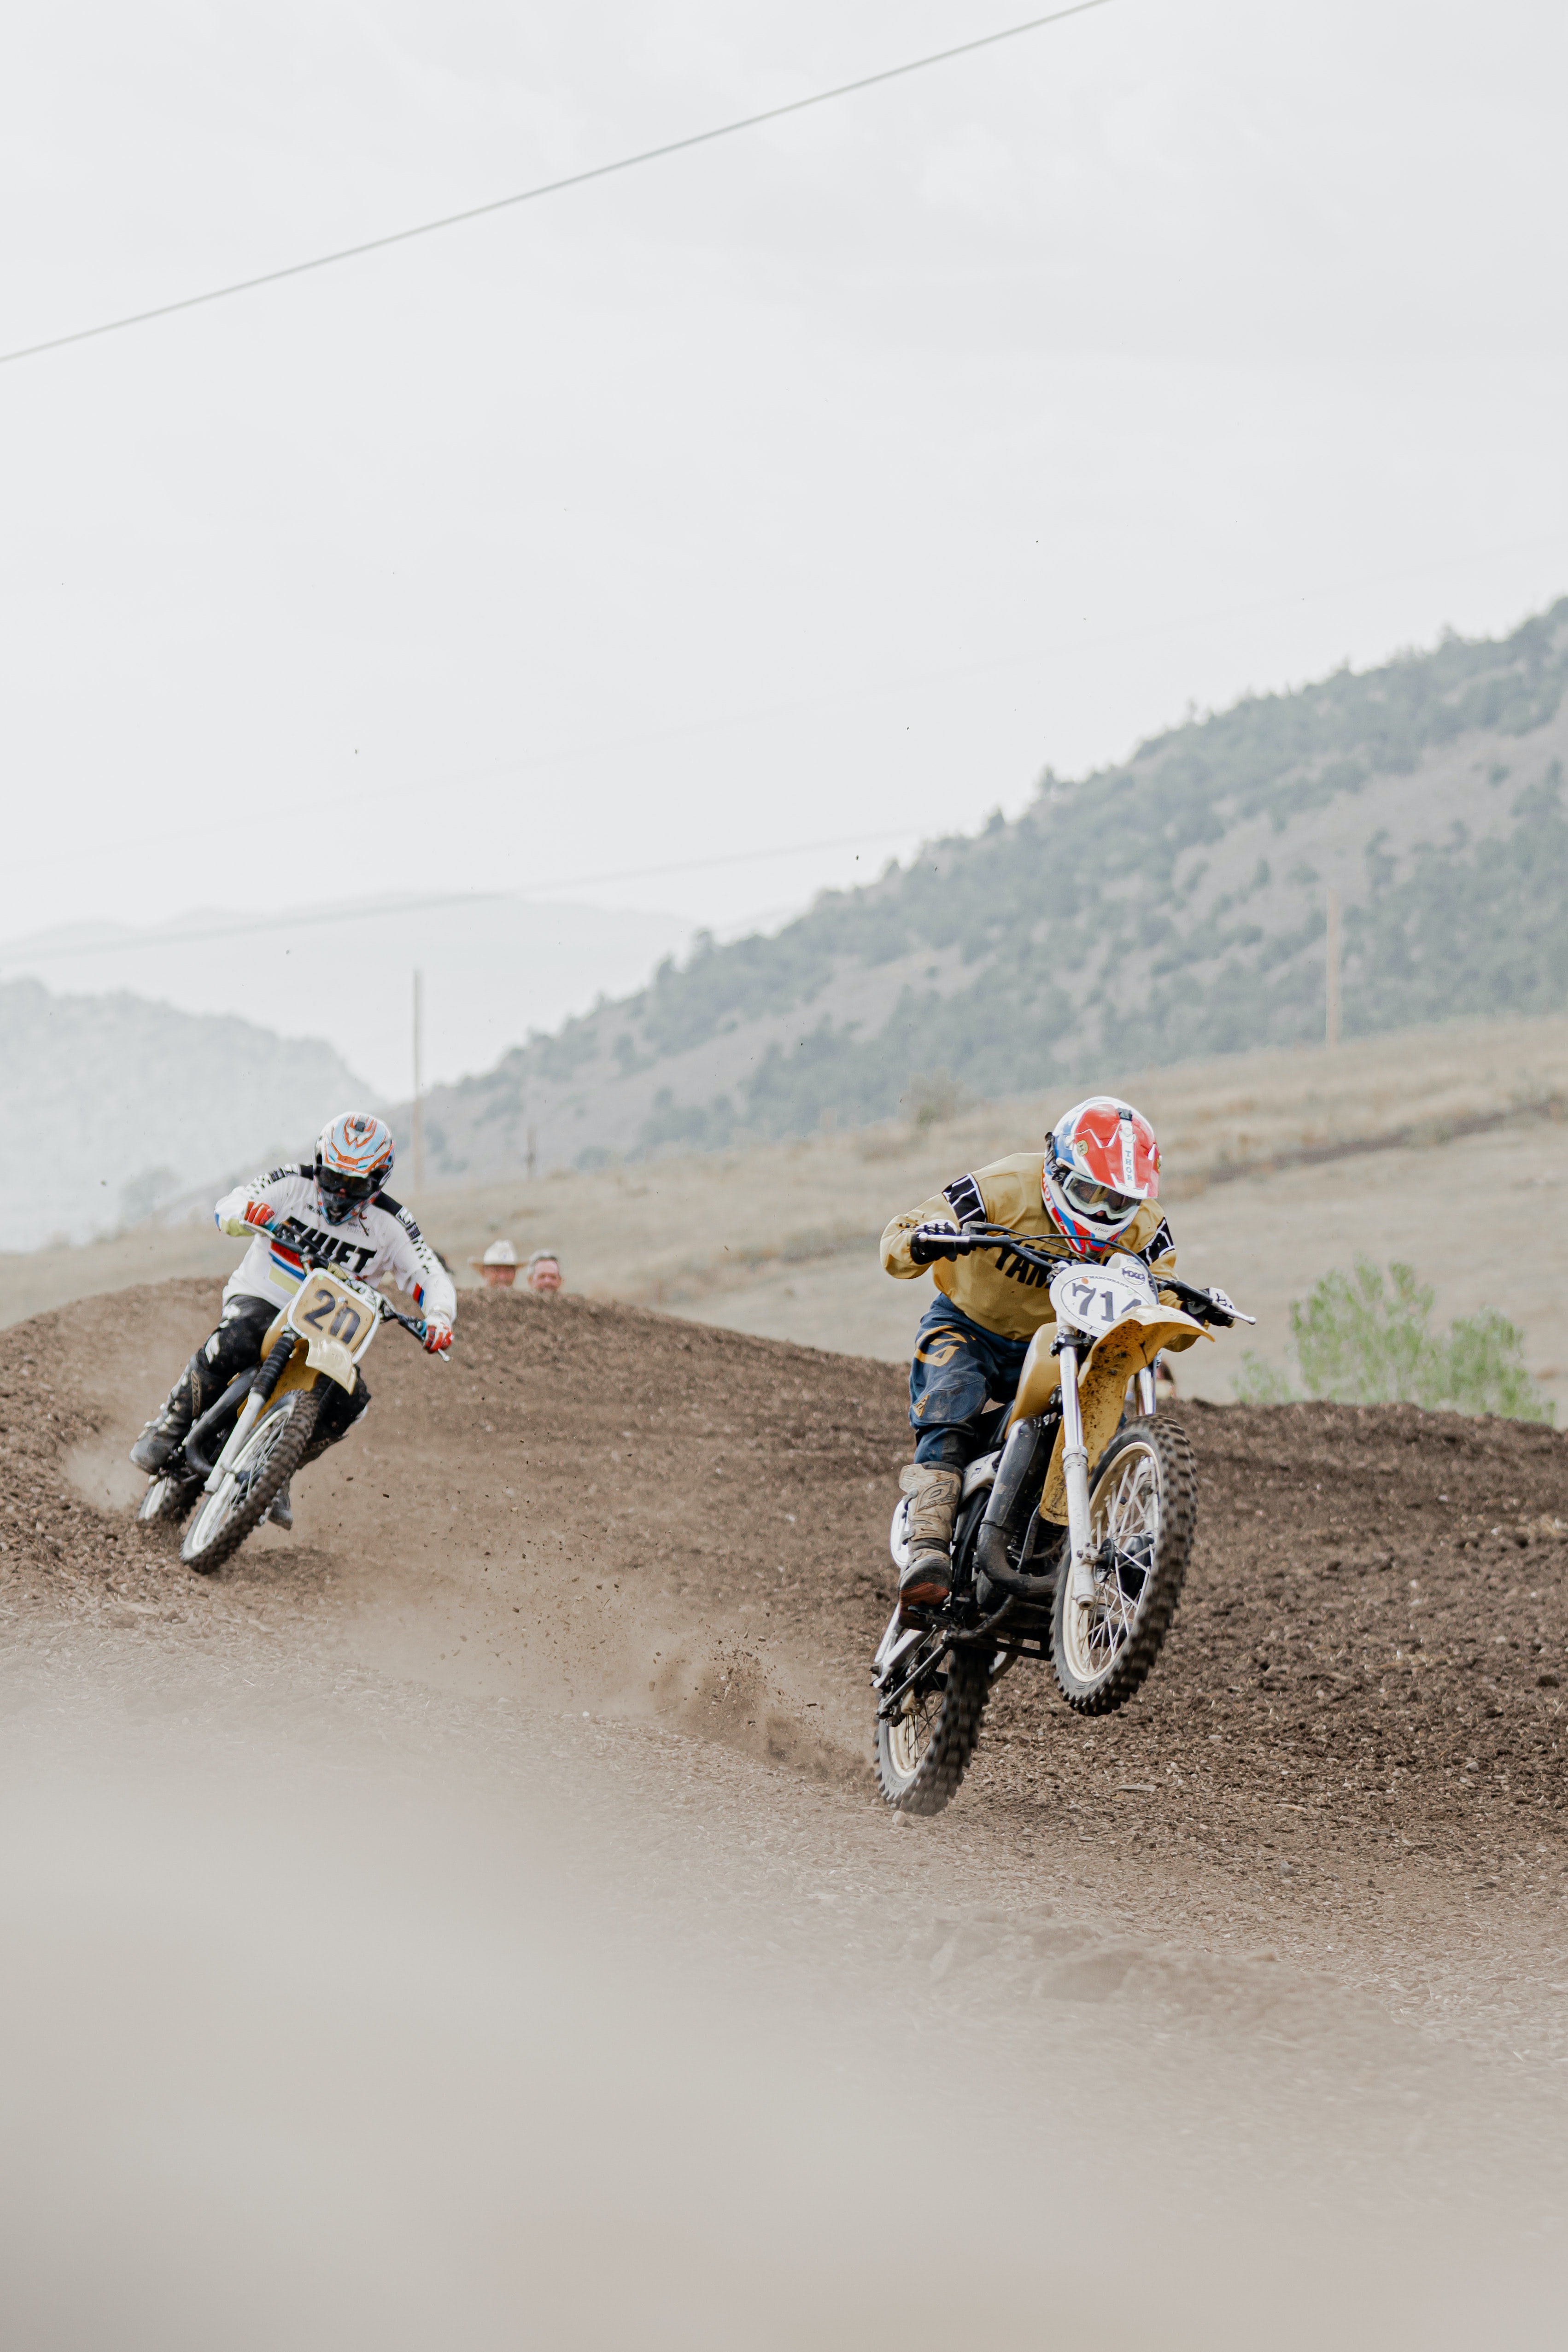 motorcycles, dust, road, motorcyclist, helmet, chase